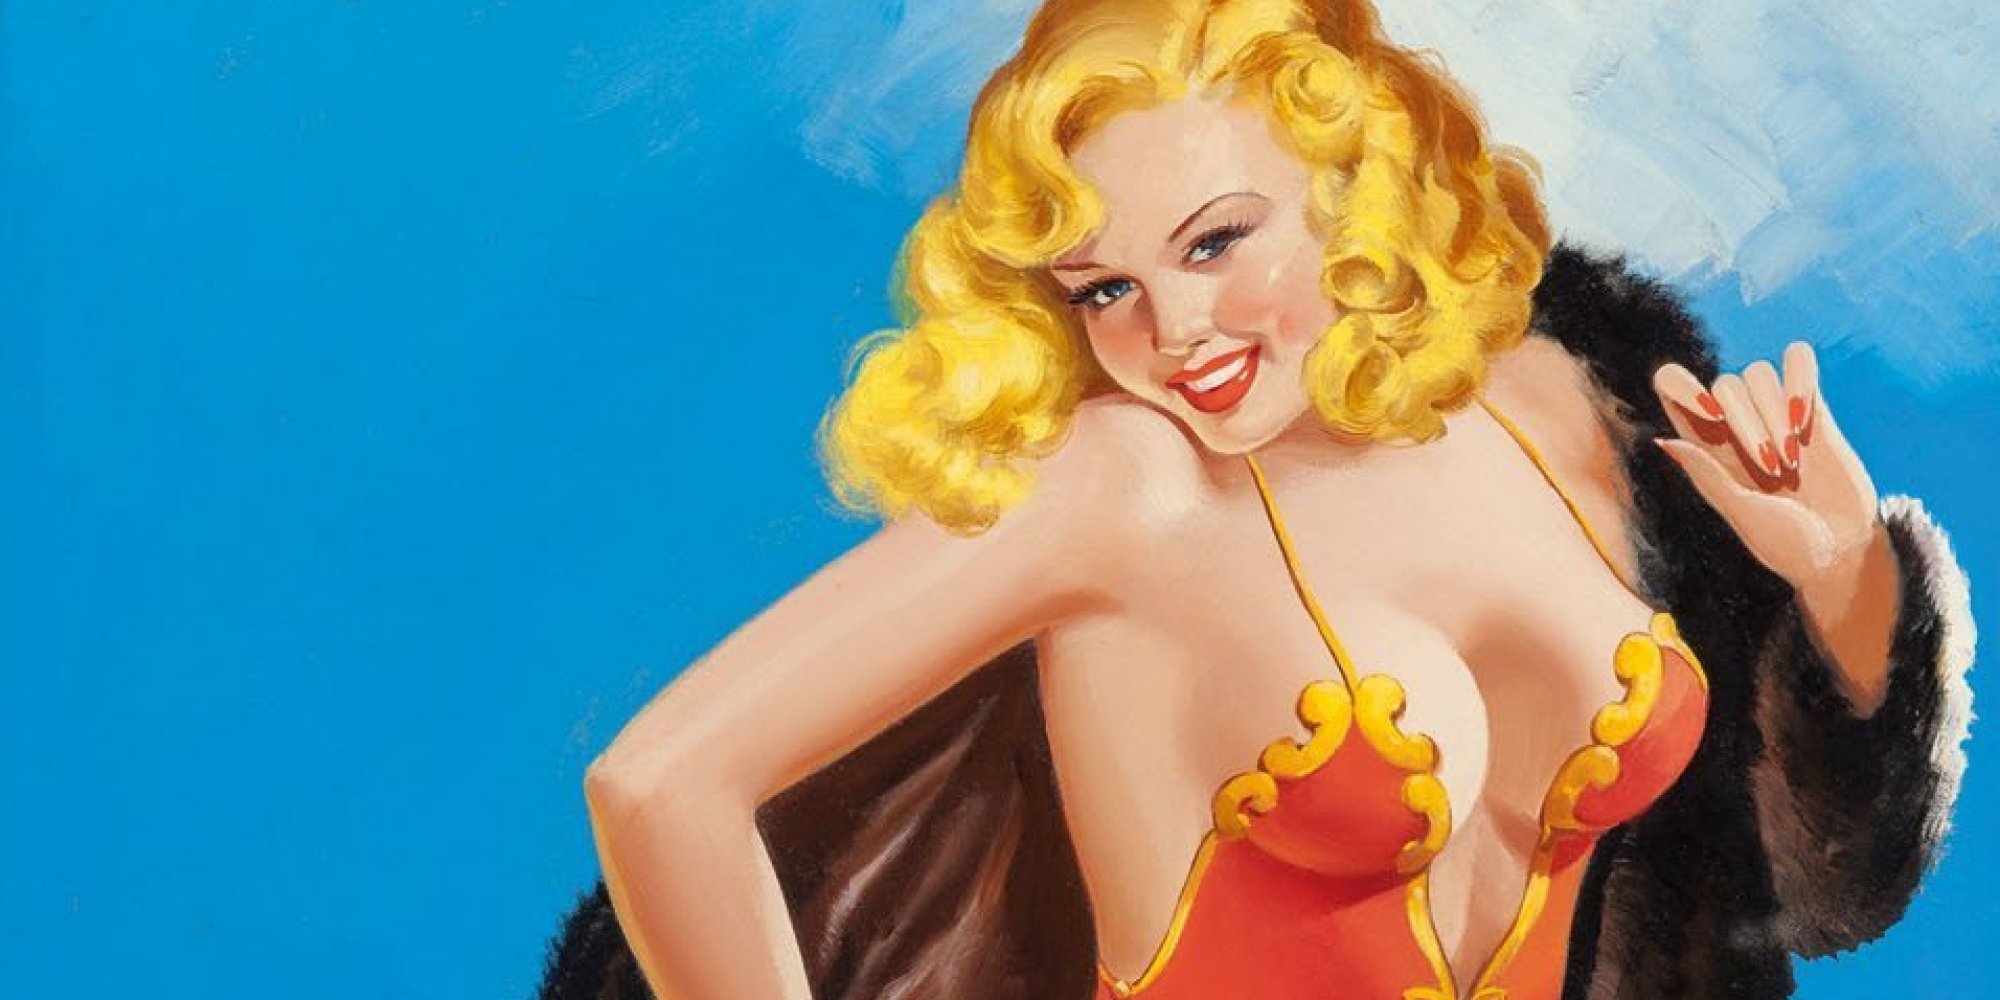 The History Of The Pin Up Girl From The 1800s To The